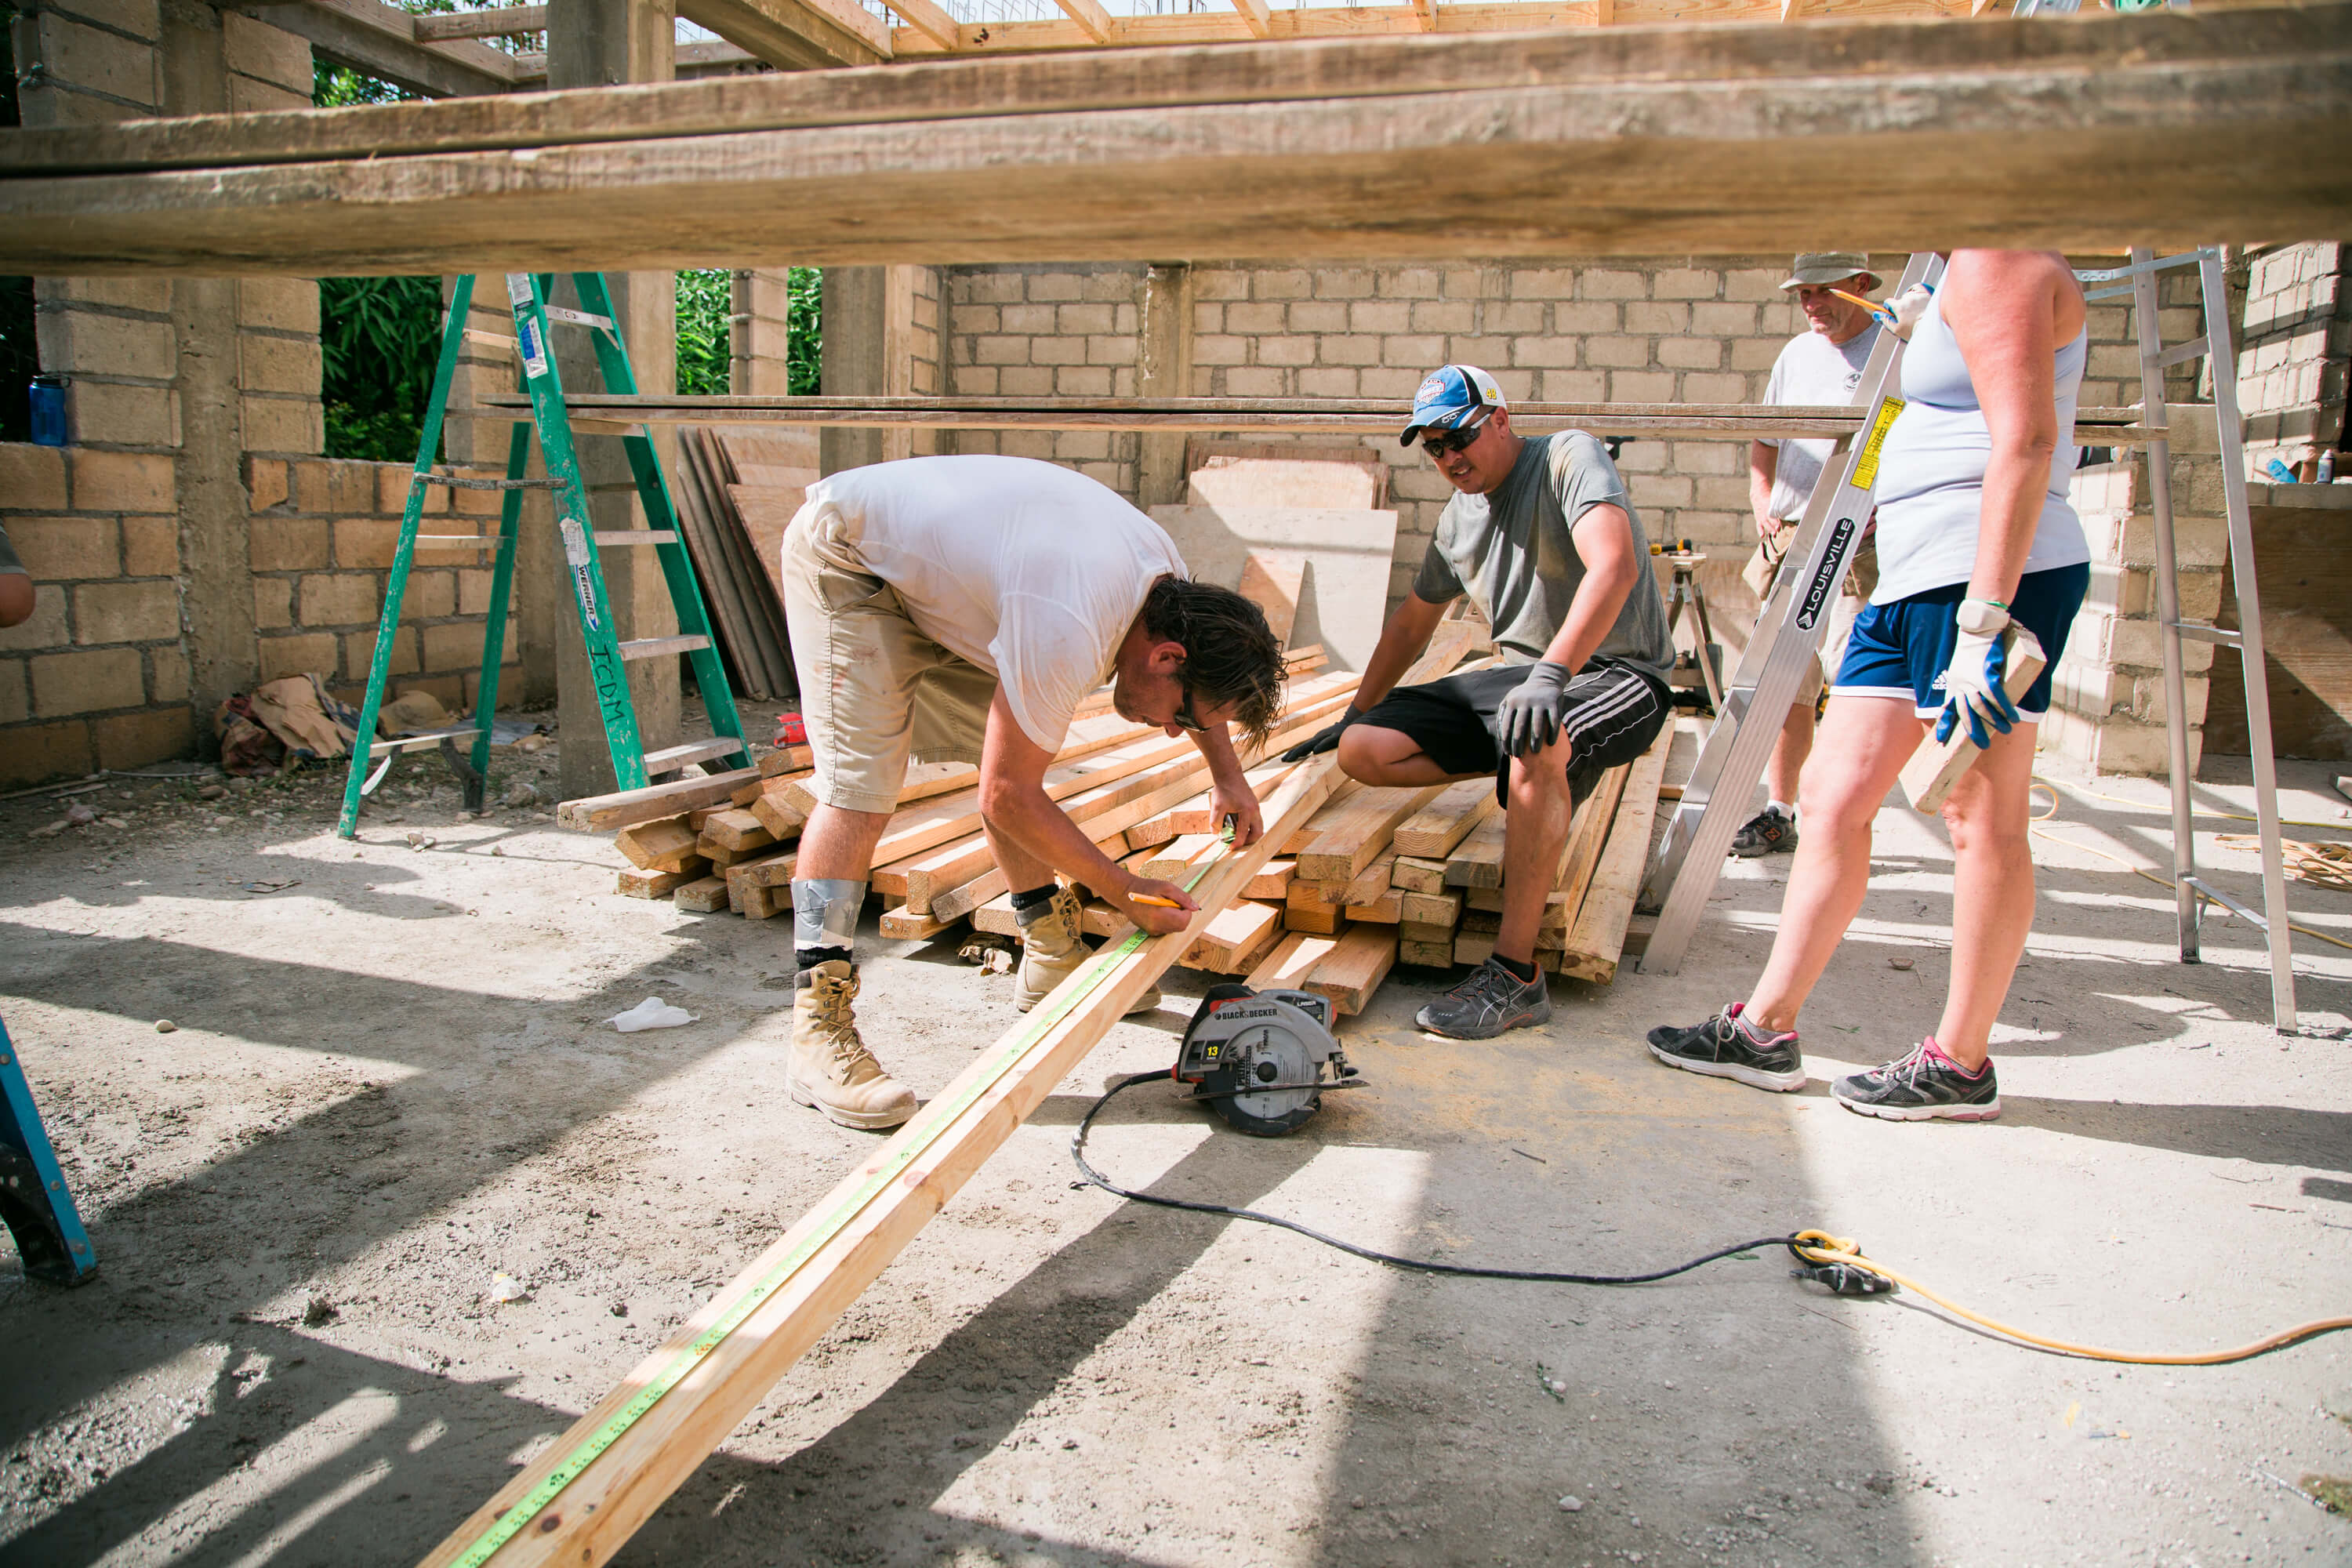 A crew from a Court House church frames windows for shutters on a home being built in Haiti.